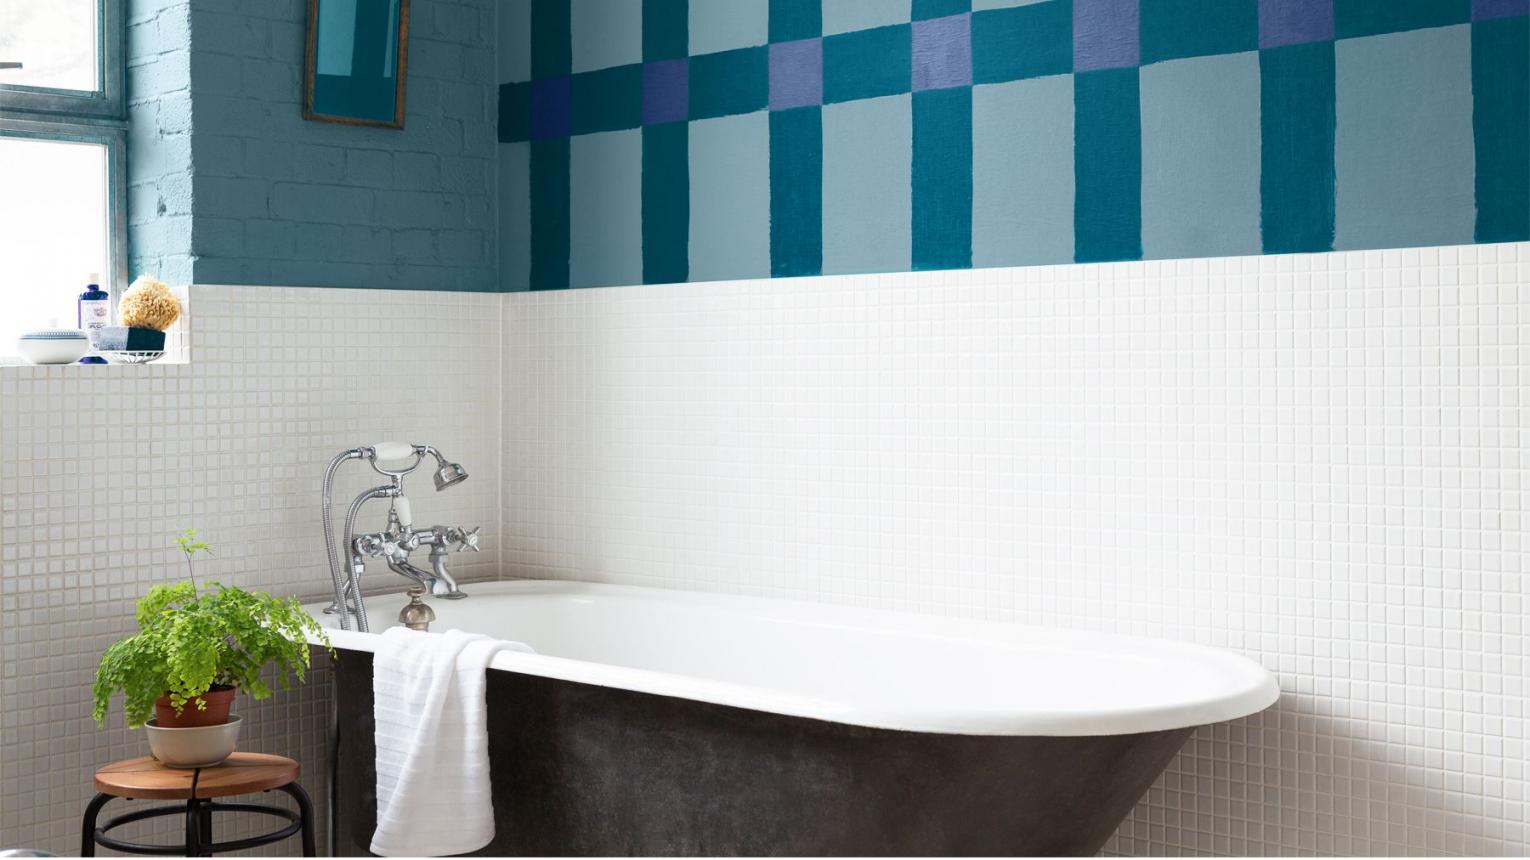 Dr Dulux How To Paint Over Tiles, Can You Paint Over Tile